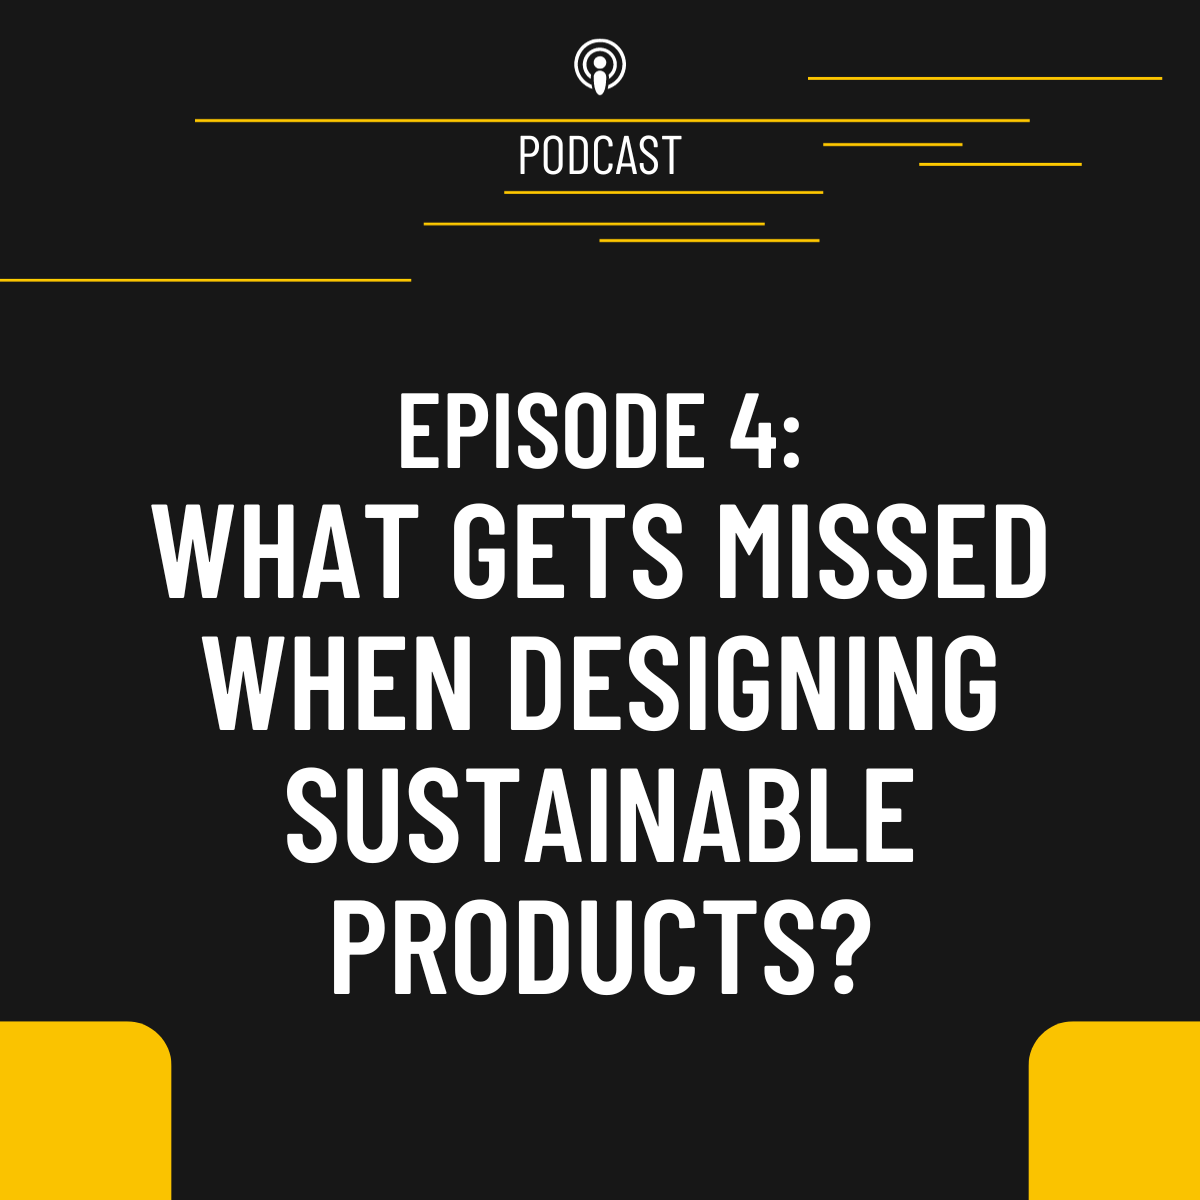 What gets missed when designing sustainable products?